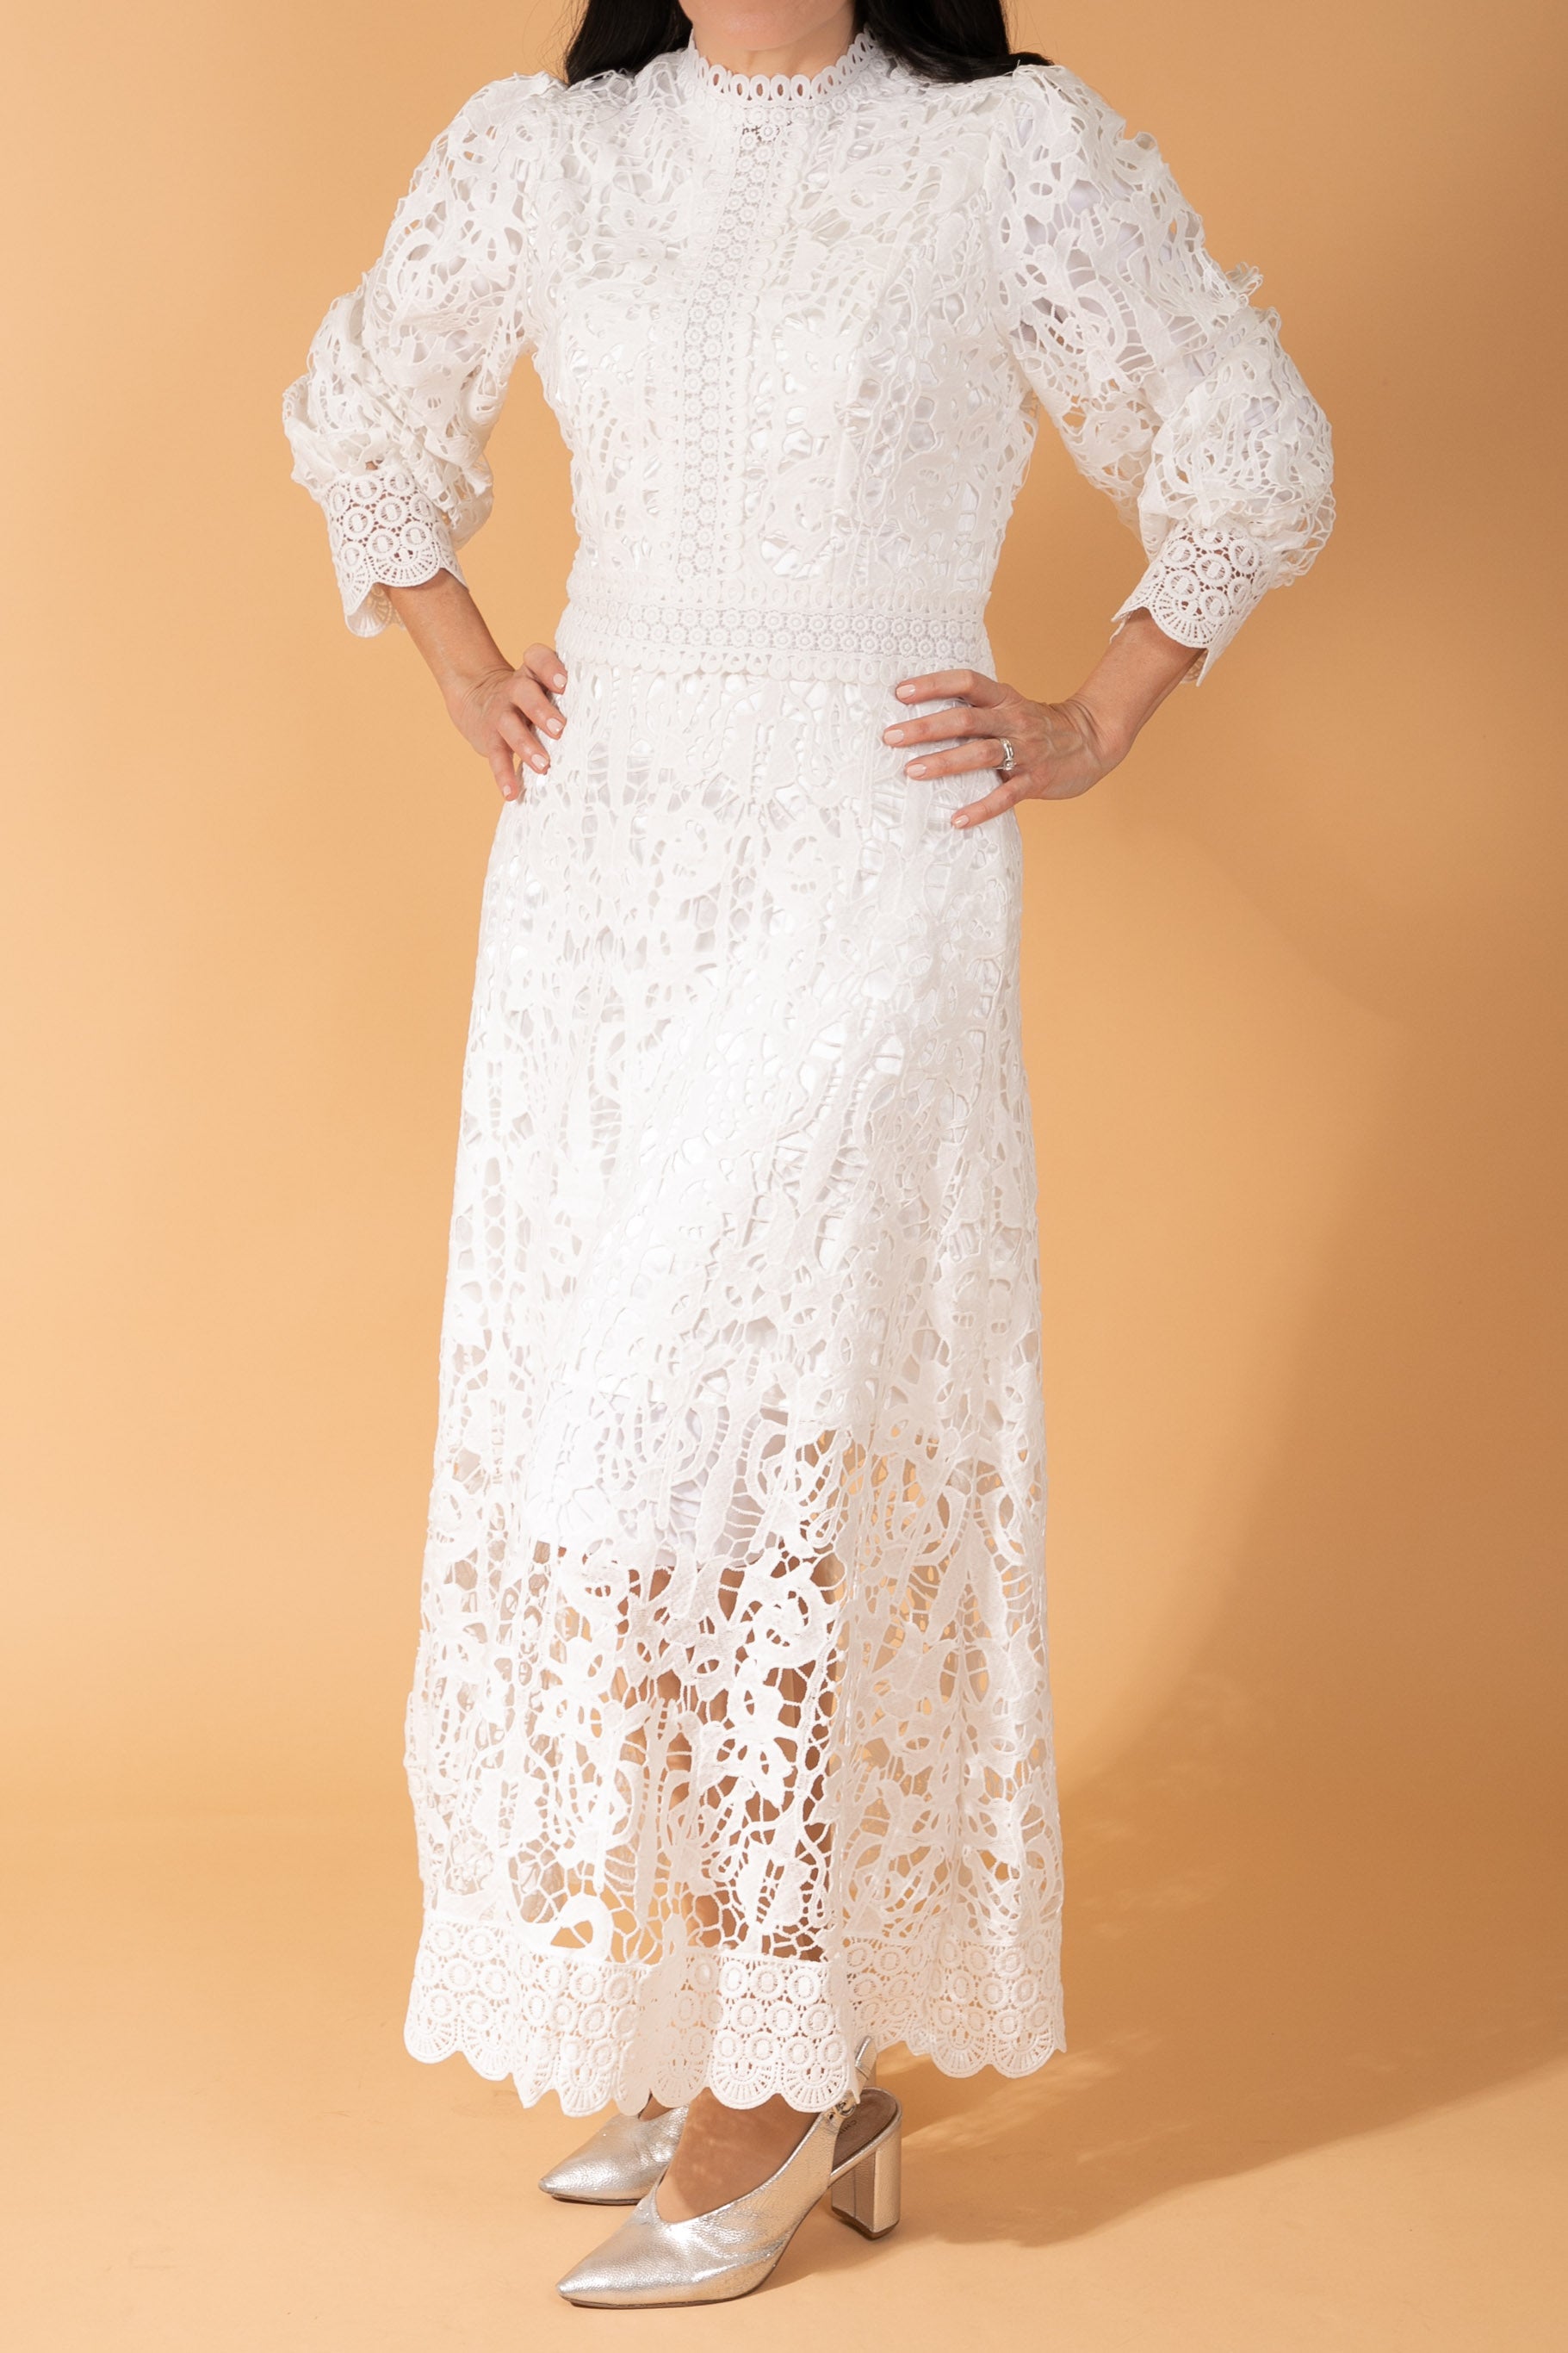 Dress in White Lace